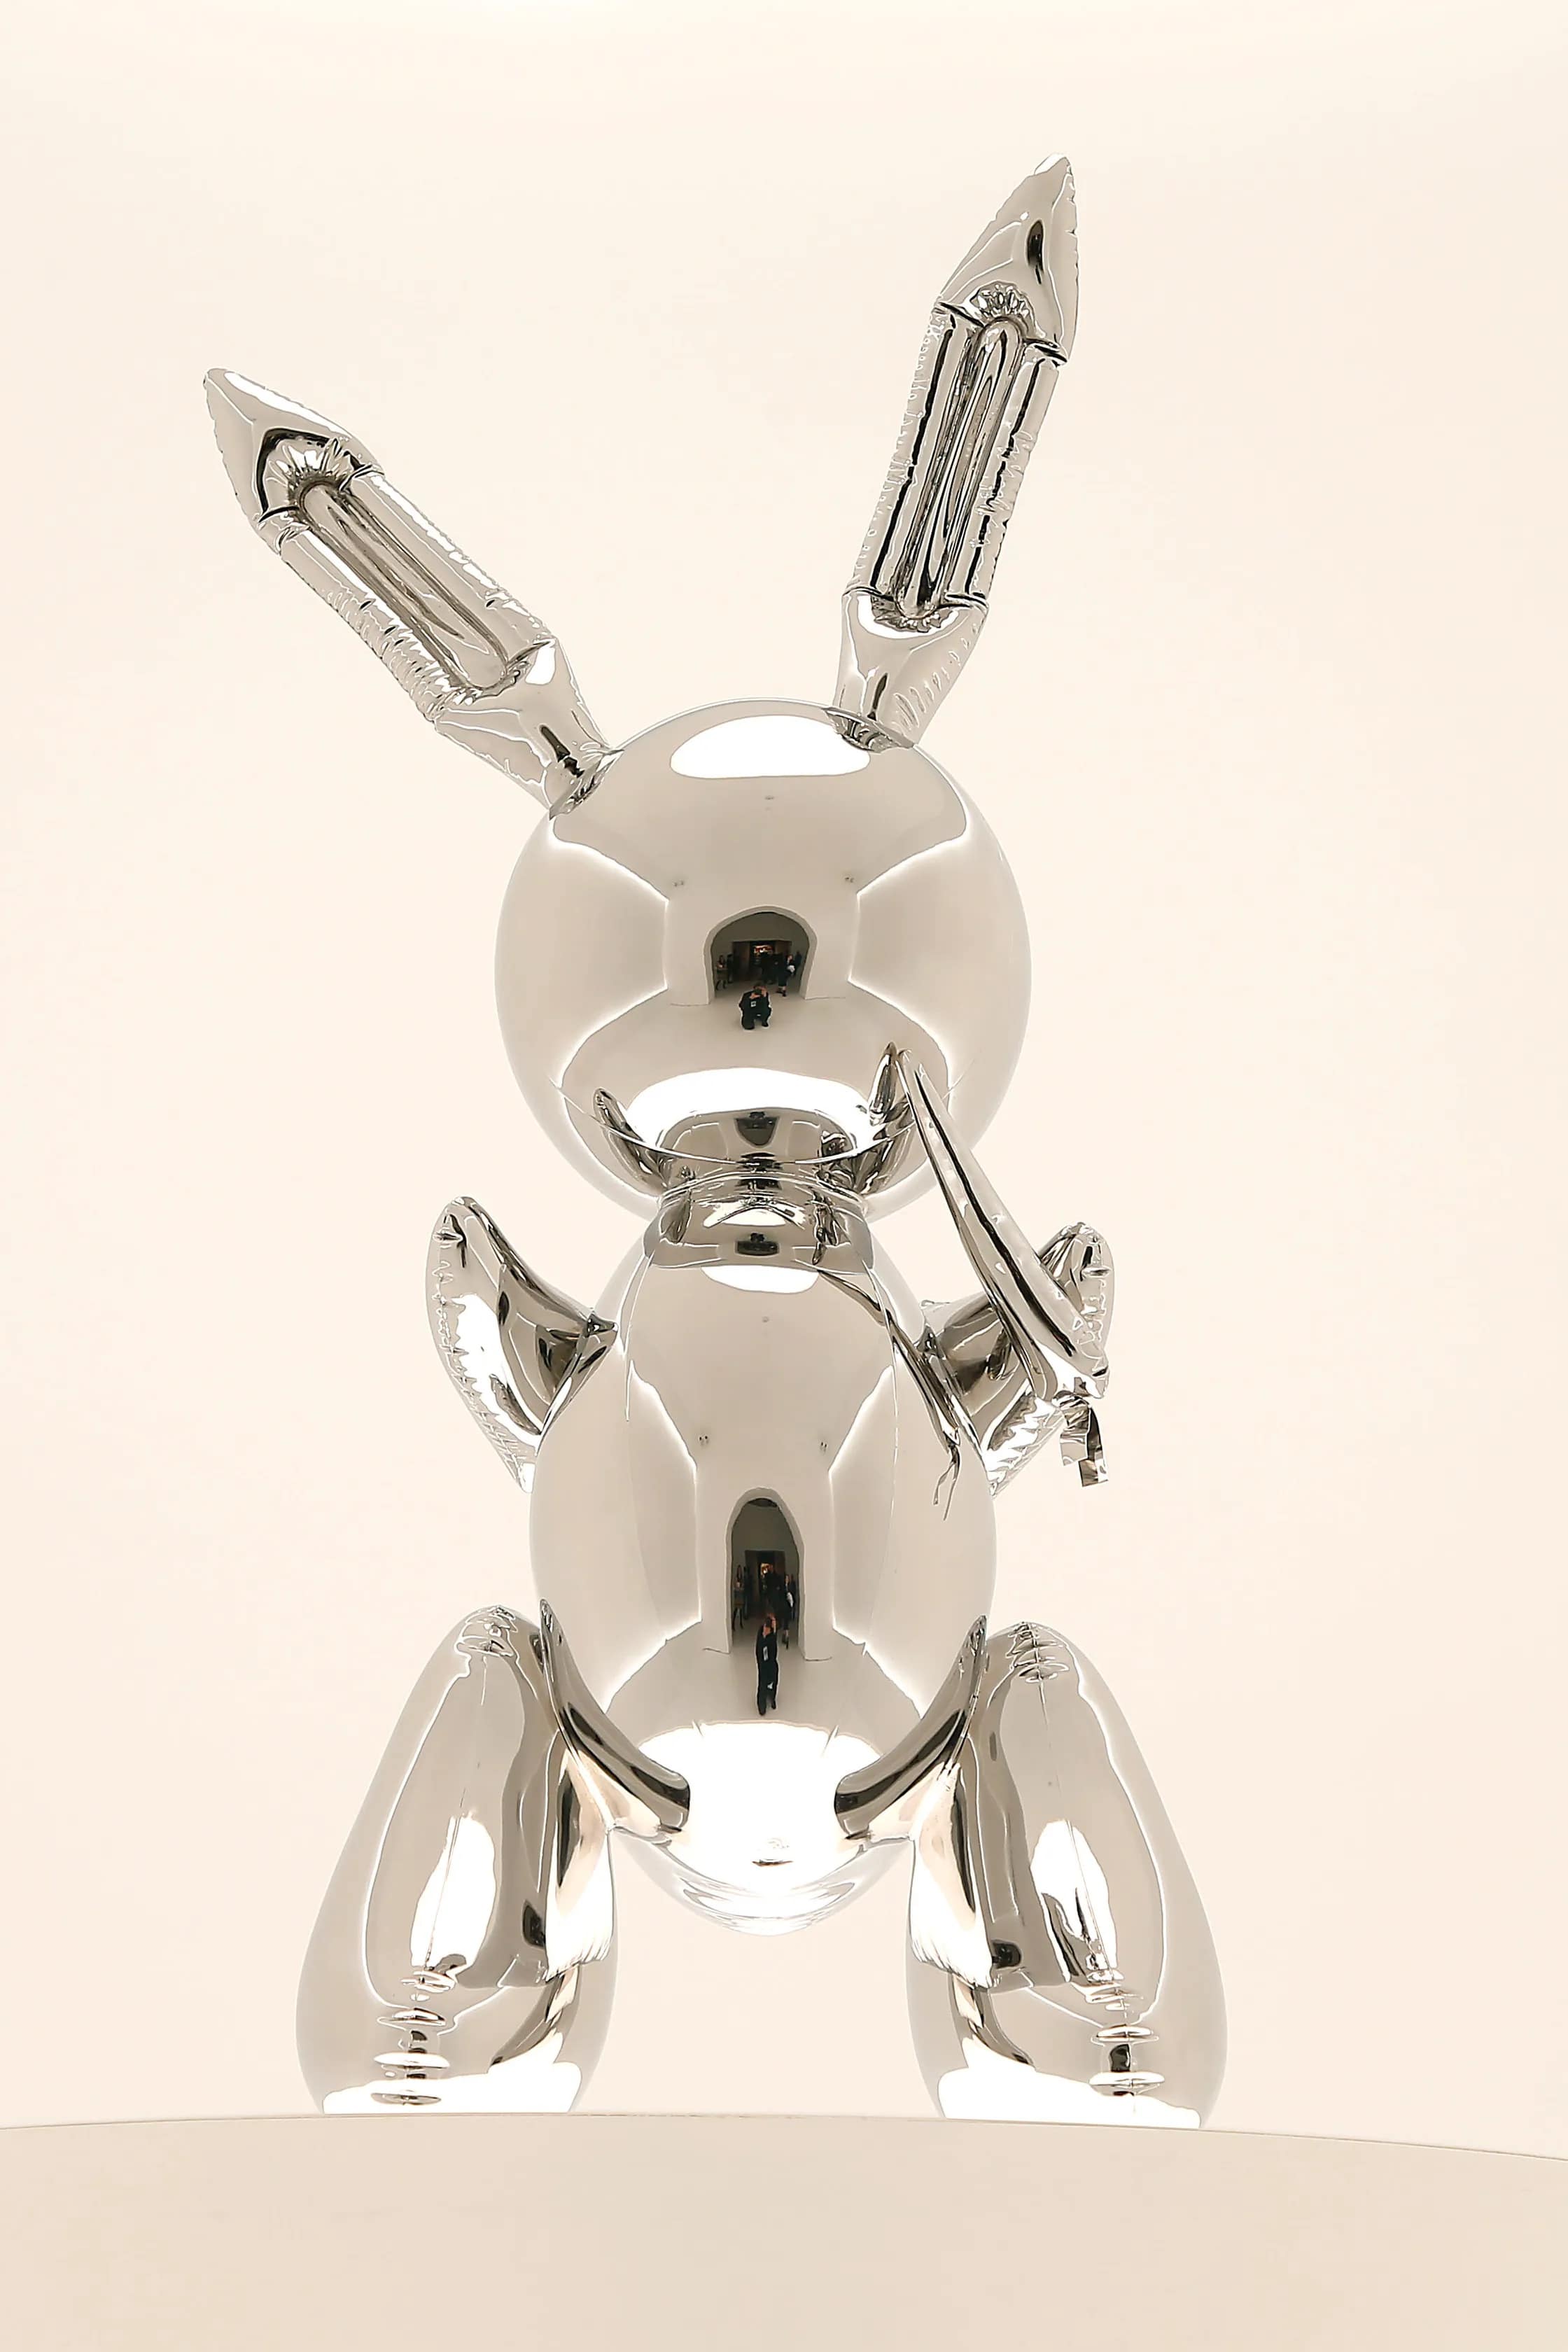 The original rabbit silver that Jeff Koons sold for 91 millions of US dollars